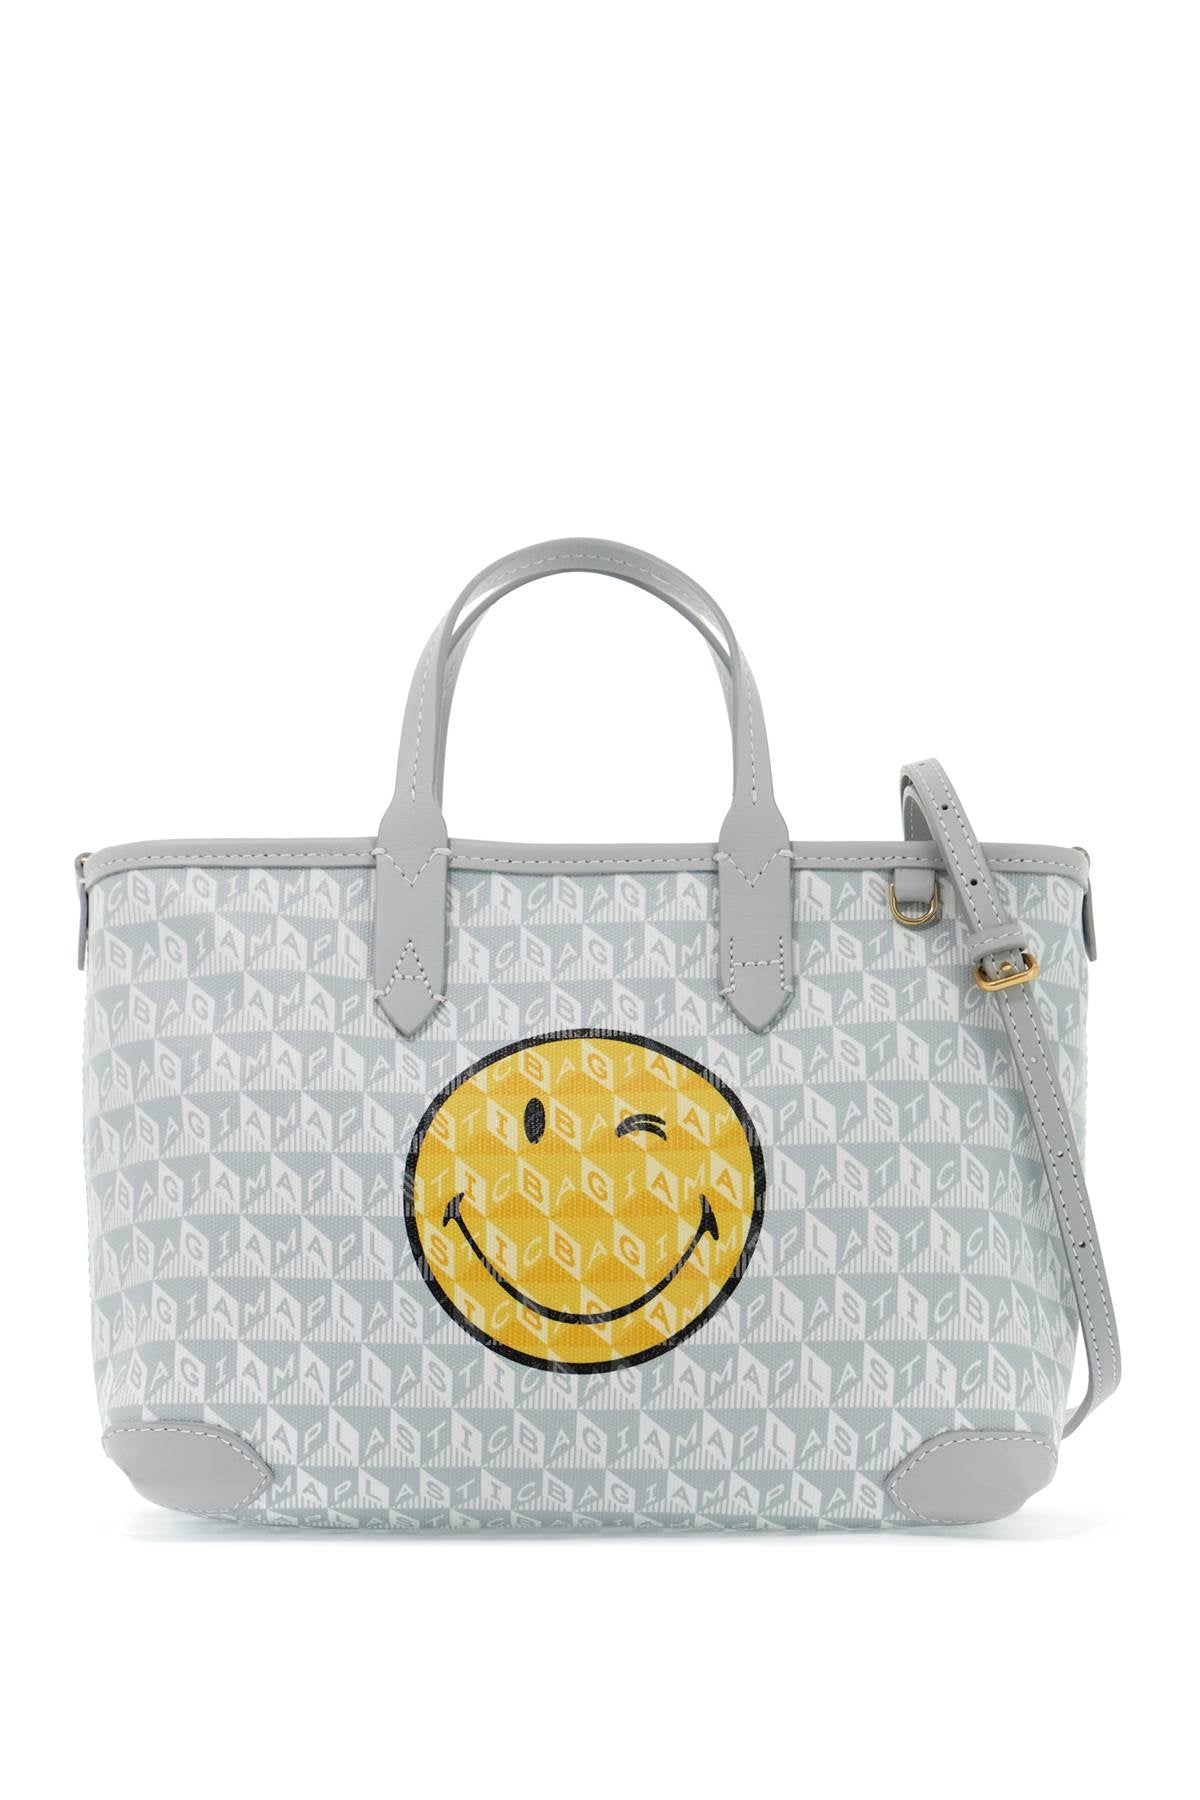 Anya Hindmarch Tote Bag "i Am A Plastic Bagreplace With Double Quote In   Grey